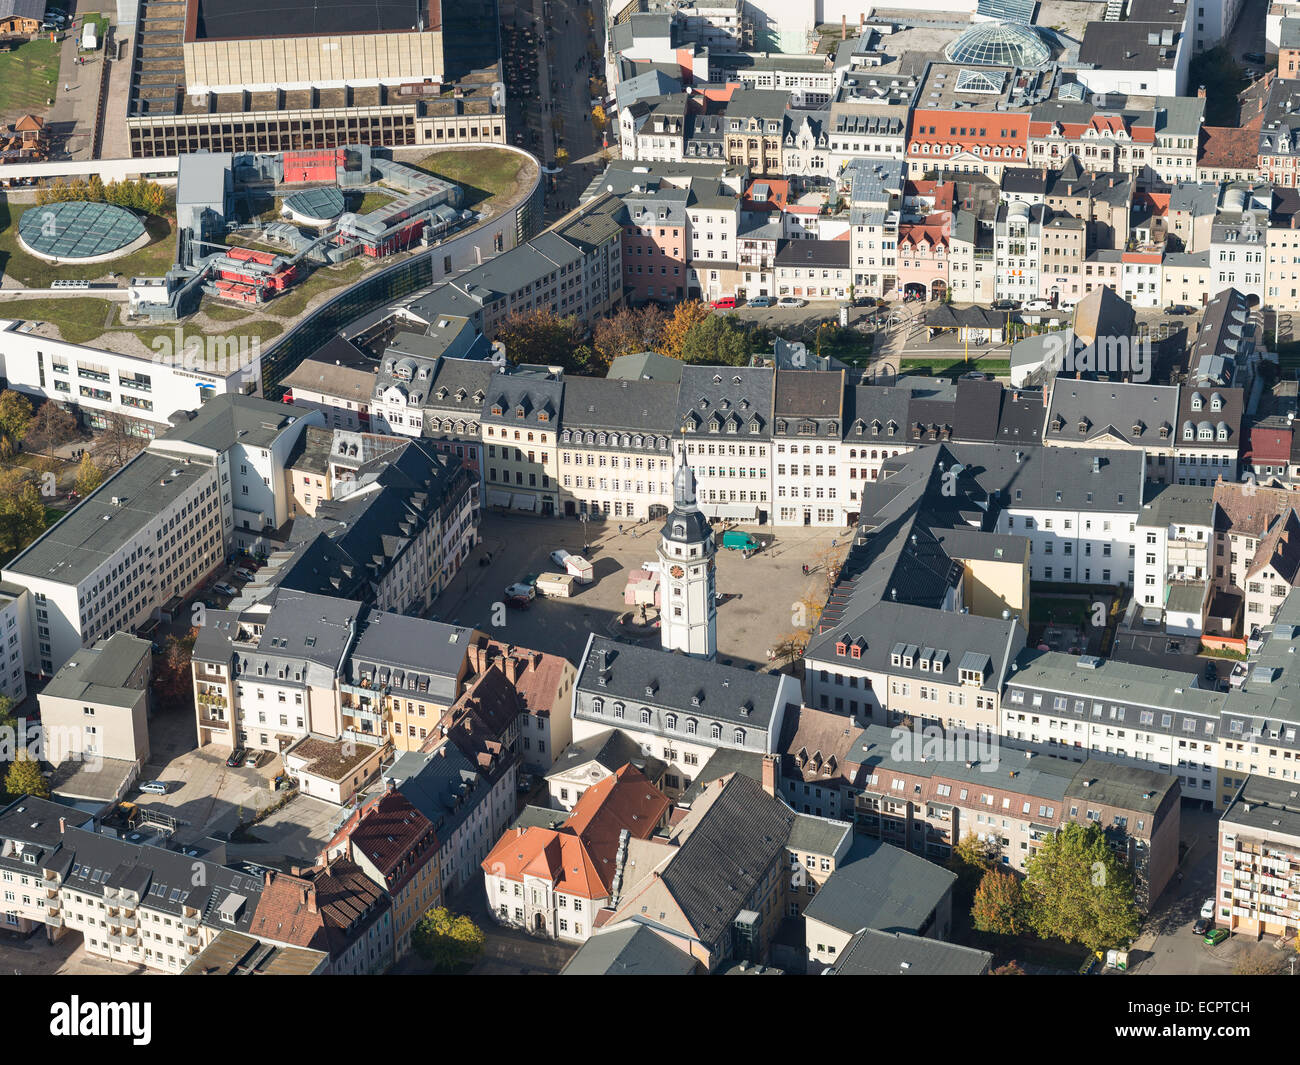 City center and market place and town hall, Kornmarkt square in front, Gera, Thuringia, Germany Stock Photo